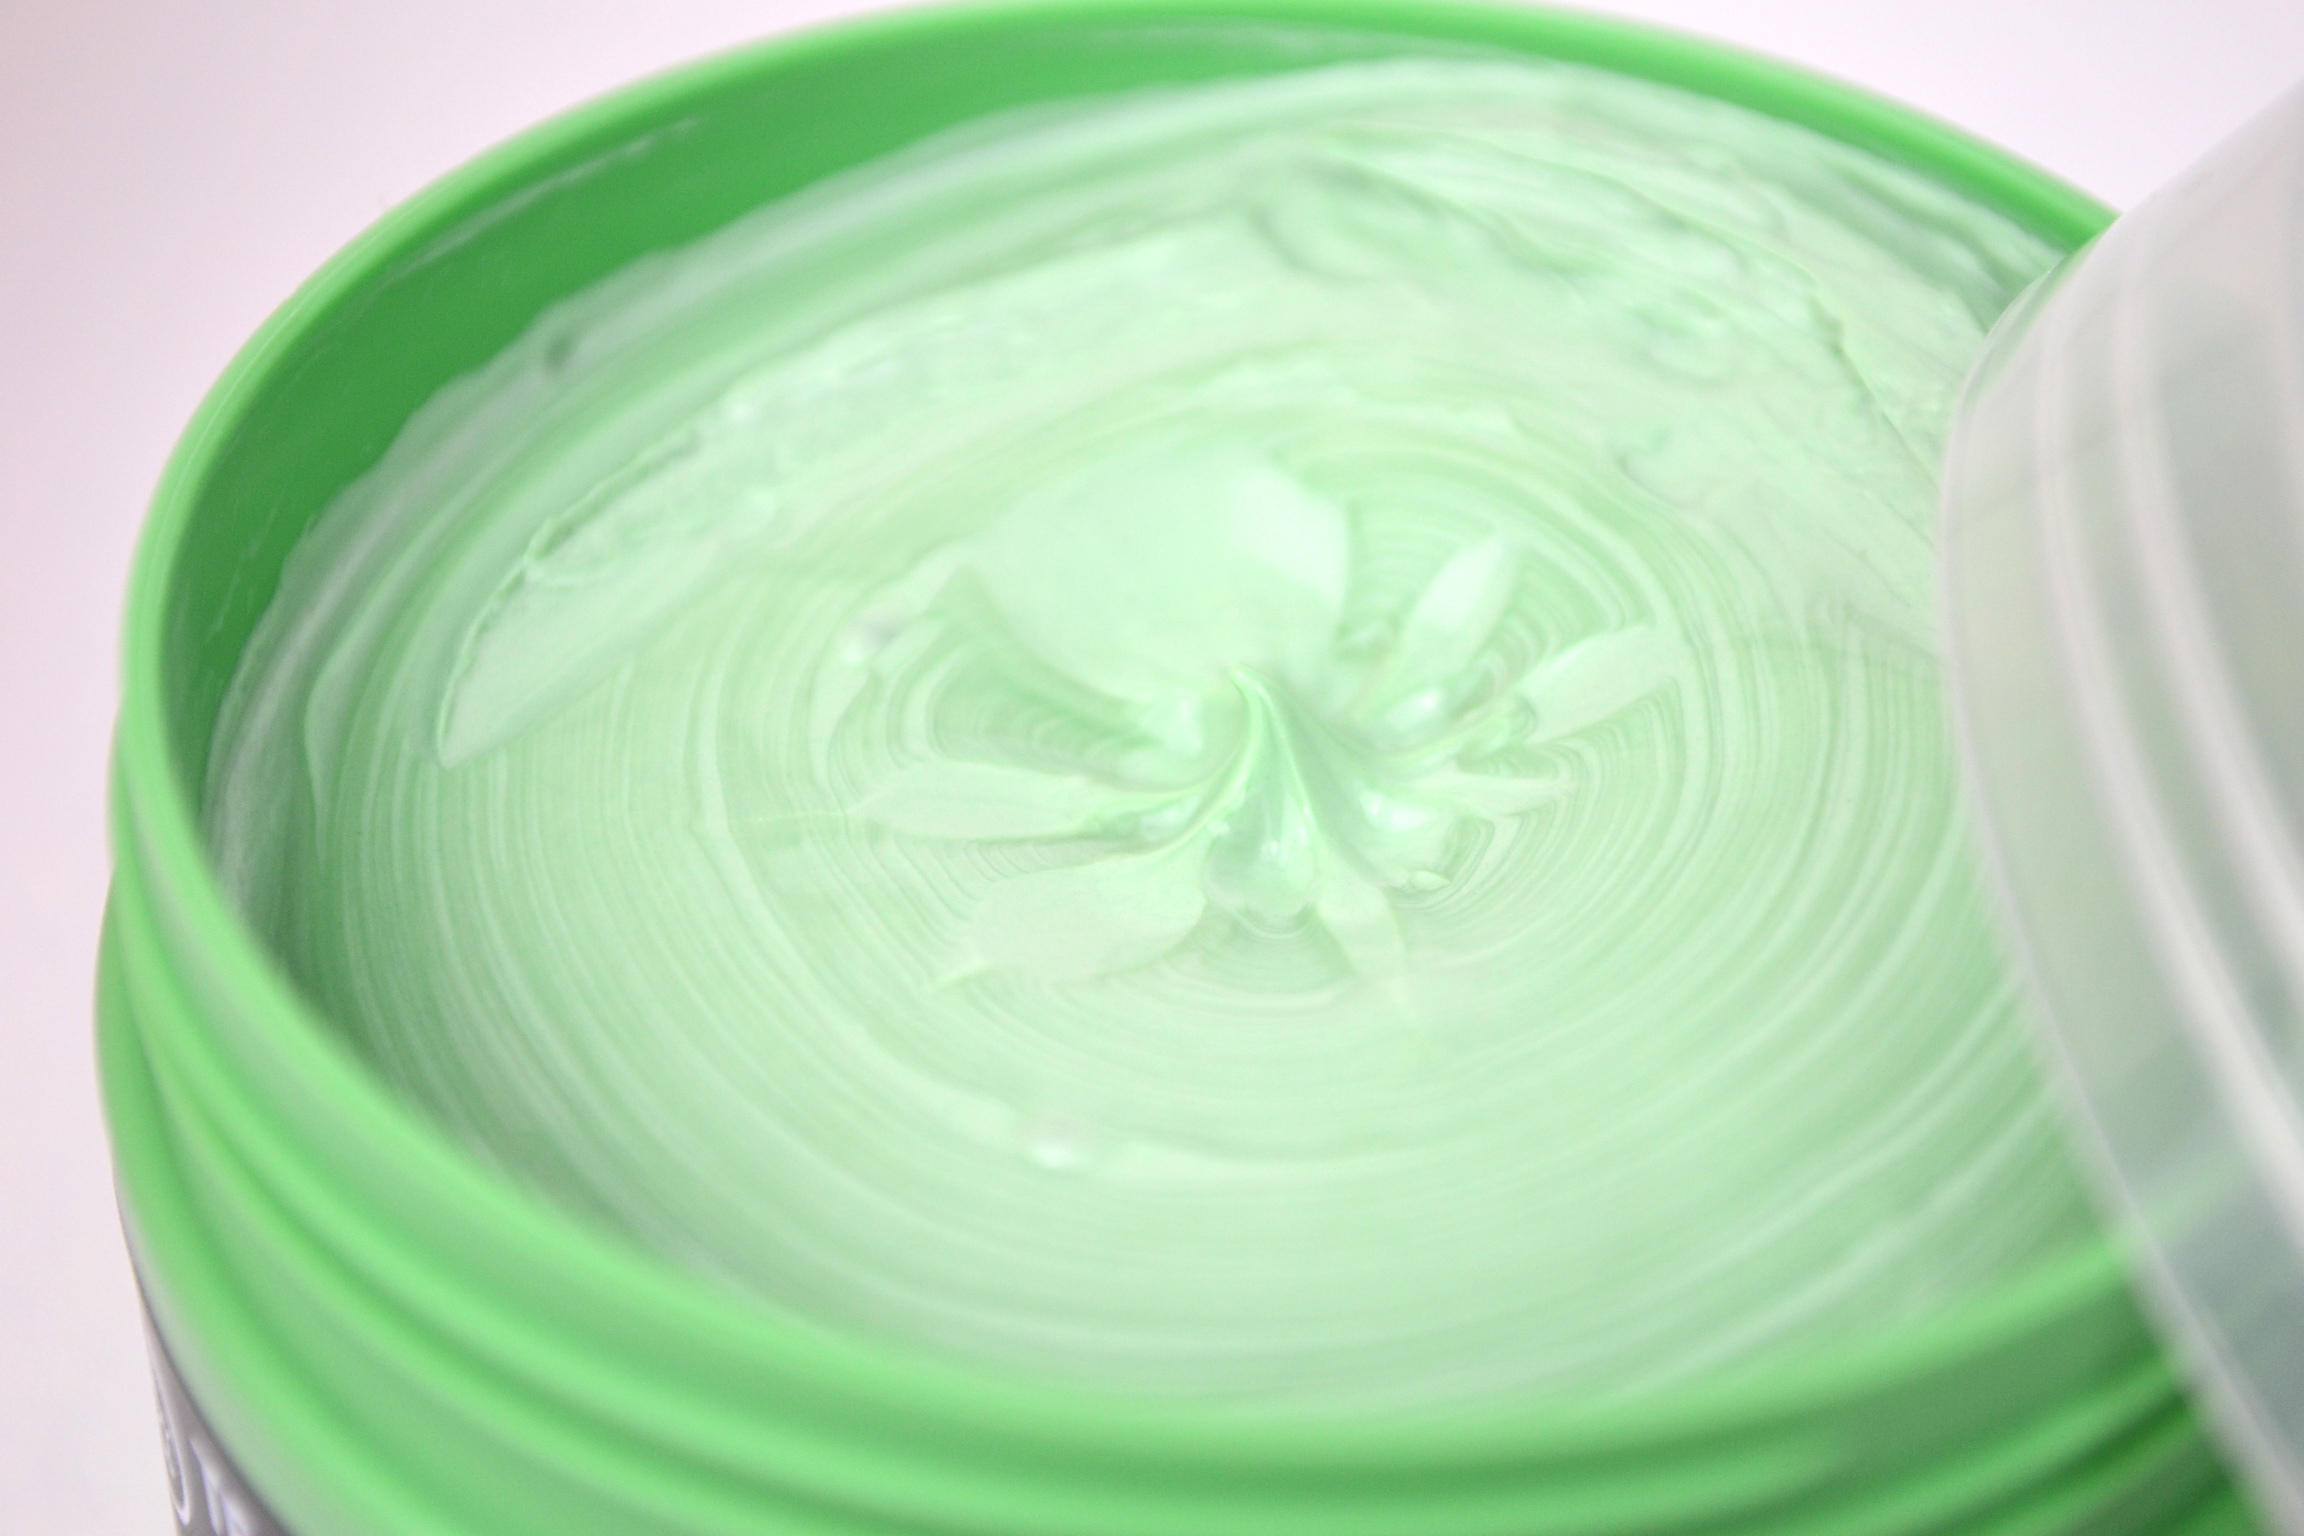 The Body Shop Tea TRee Face Mask Review